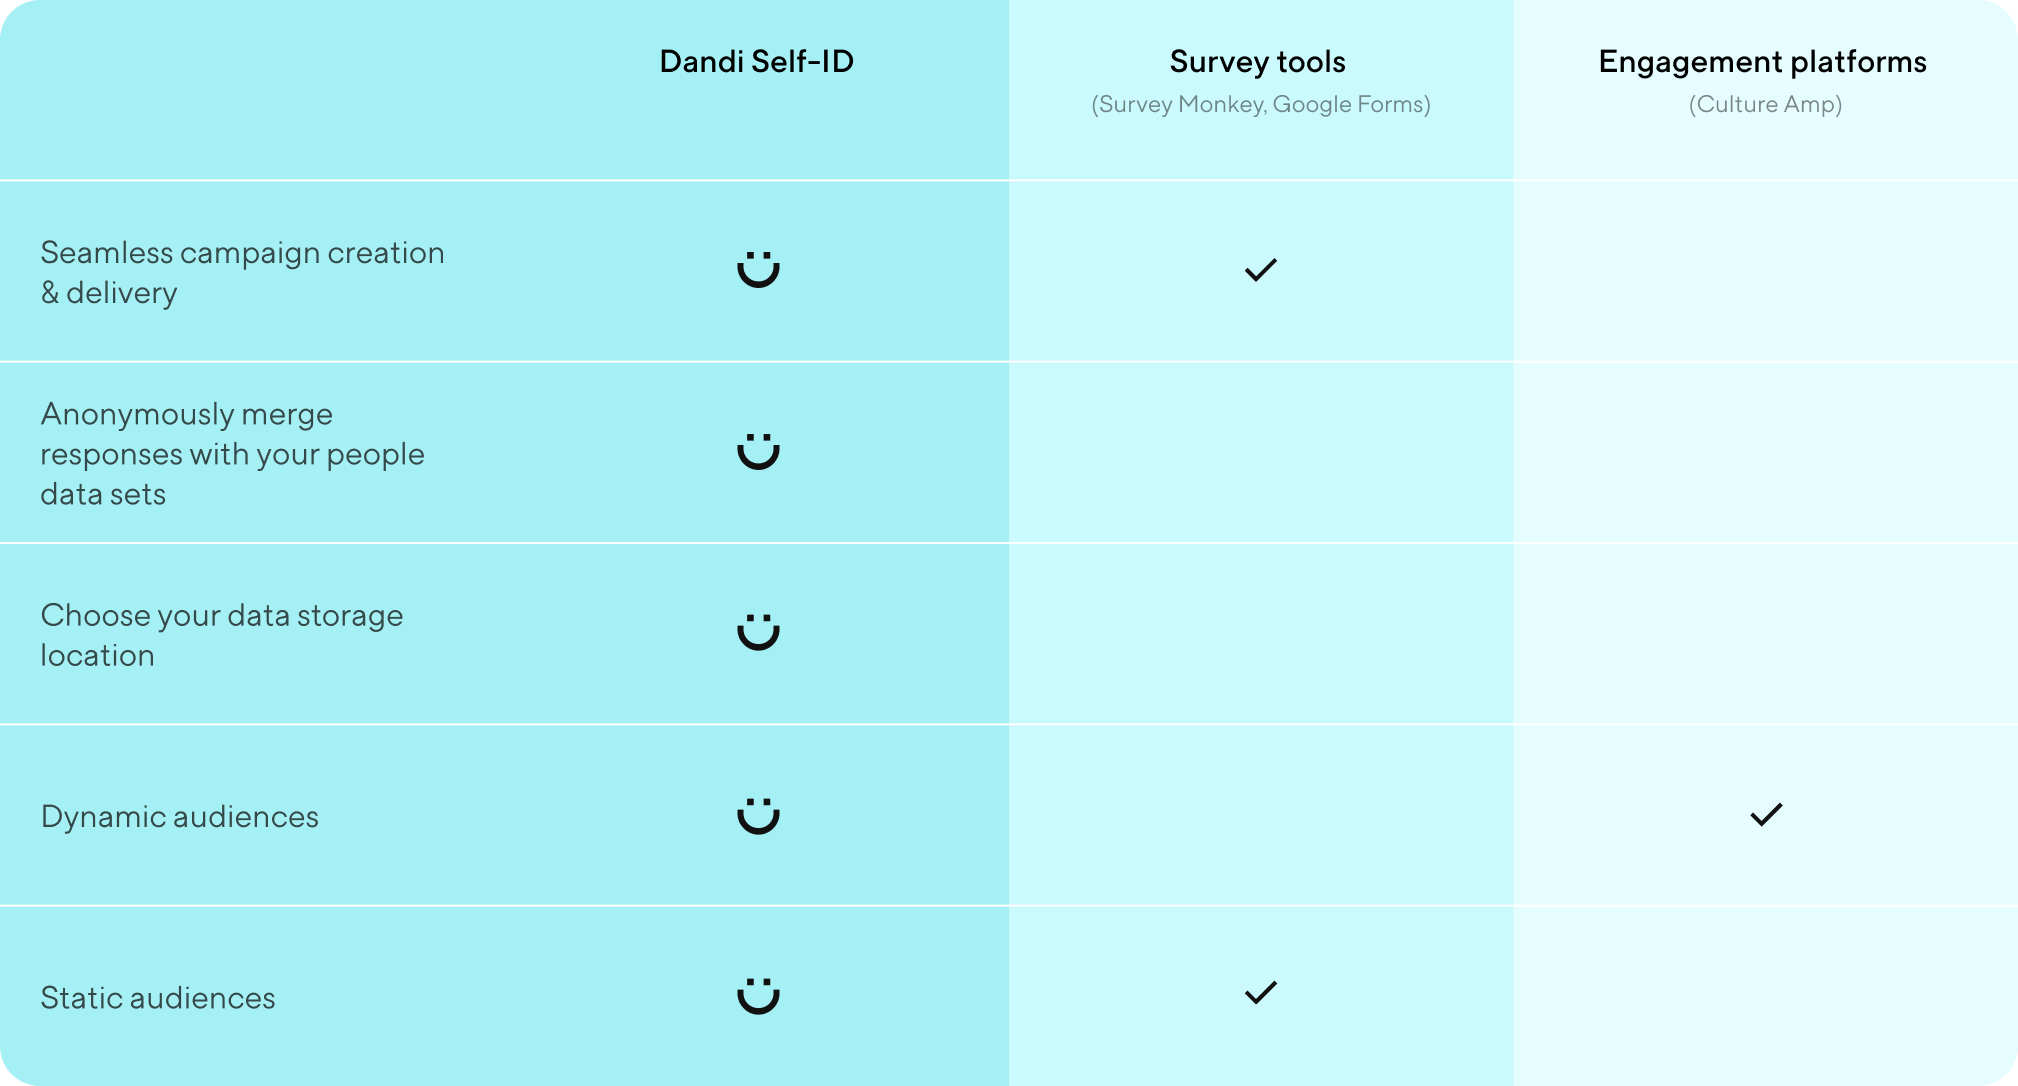 Table comparing features of Dandi Self-ID to existing survey tools, like Survey Monkey and Google Forms, and Engagement Platforms, like Culture Amp. Dandi Self-ID features include: seamless campaign creation & delivery, anonymously merge responses with your people data sets, choose your data storage location, dynamic audiences, static audiences